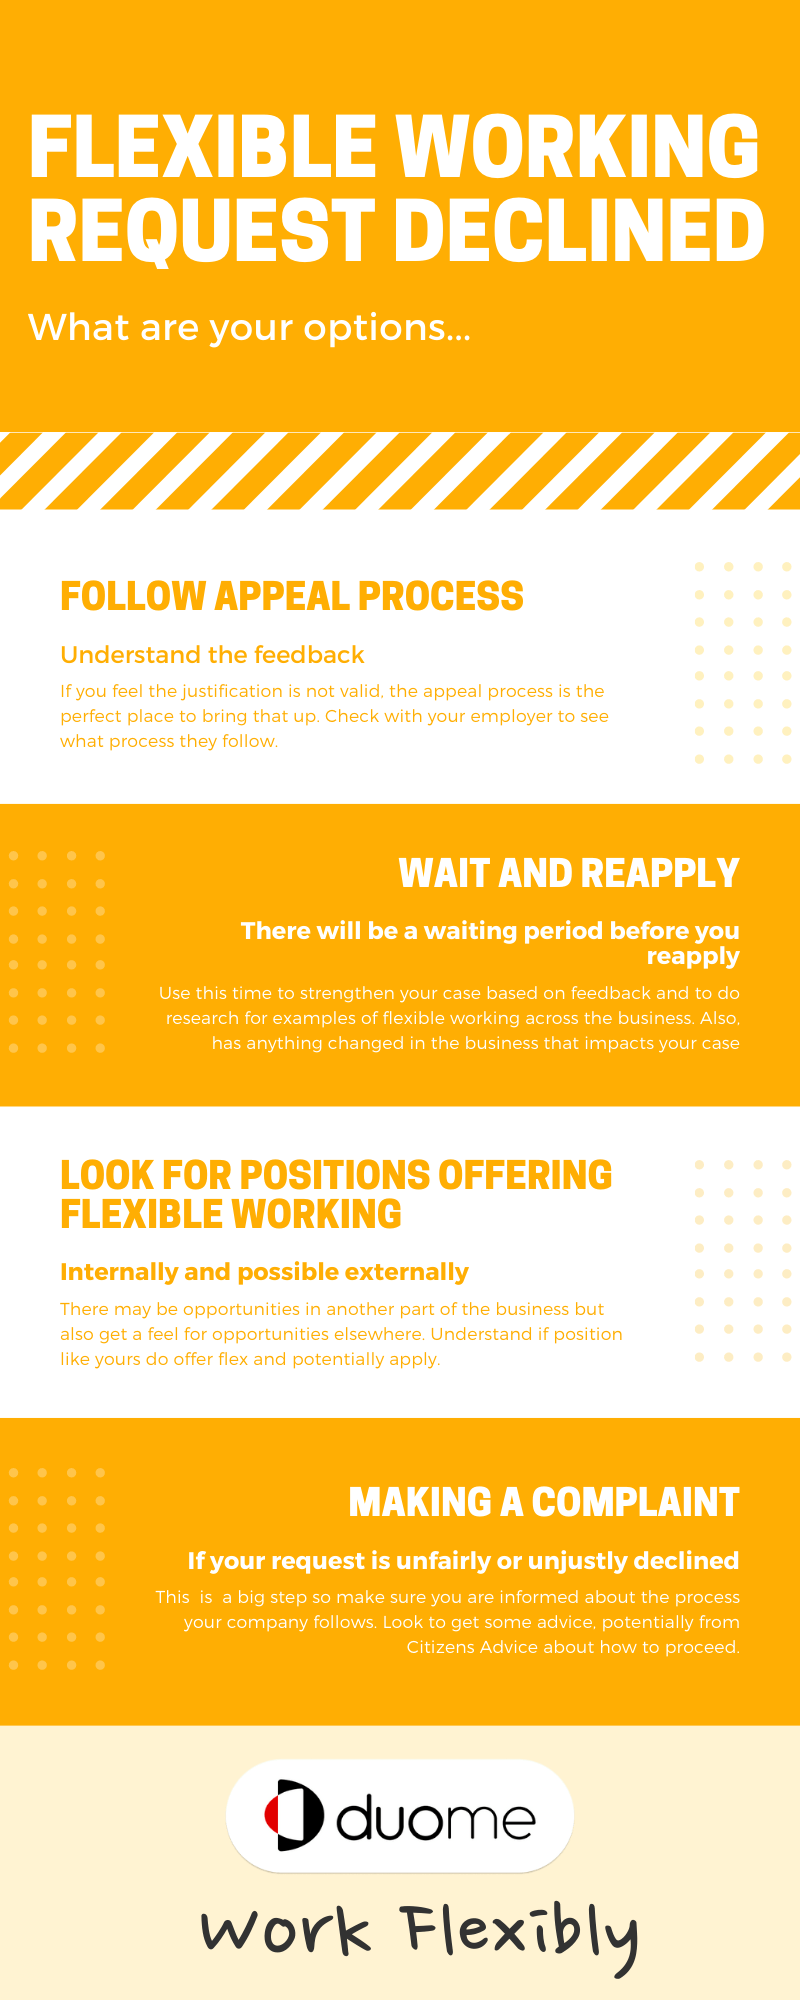 Infographic showing options if your flexible working request is declined